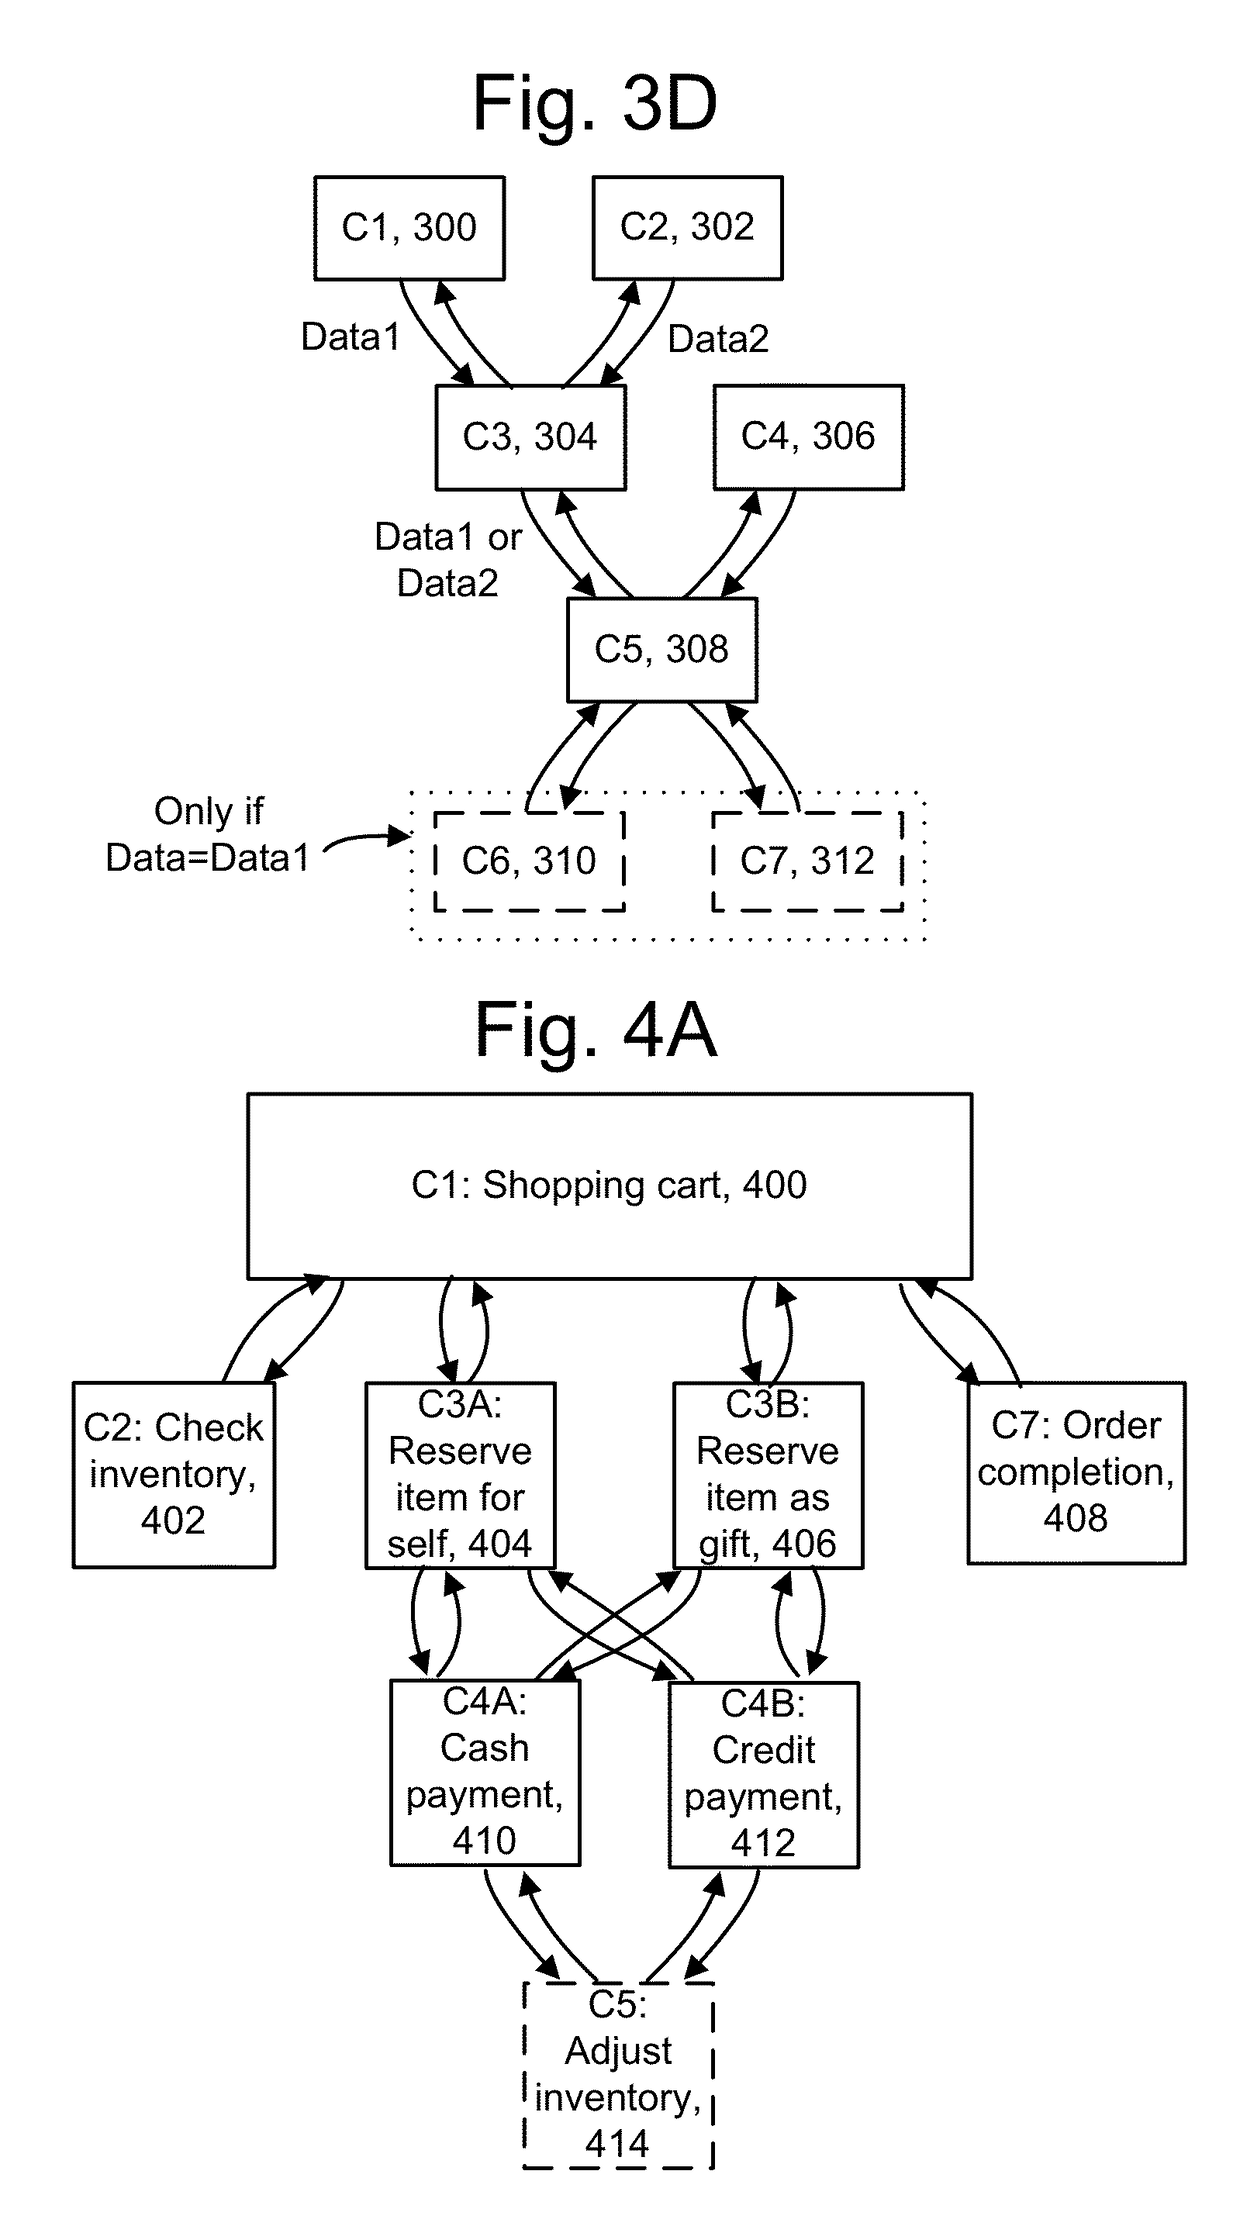 Conditional dynamic instrumentation of software in a specified transaction context